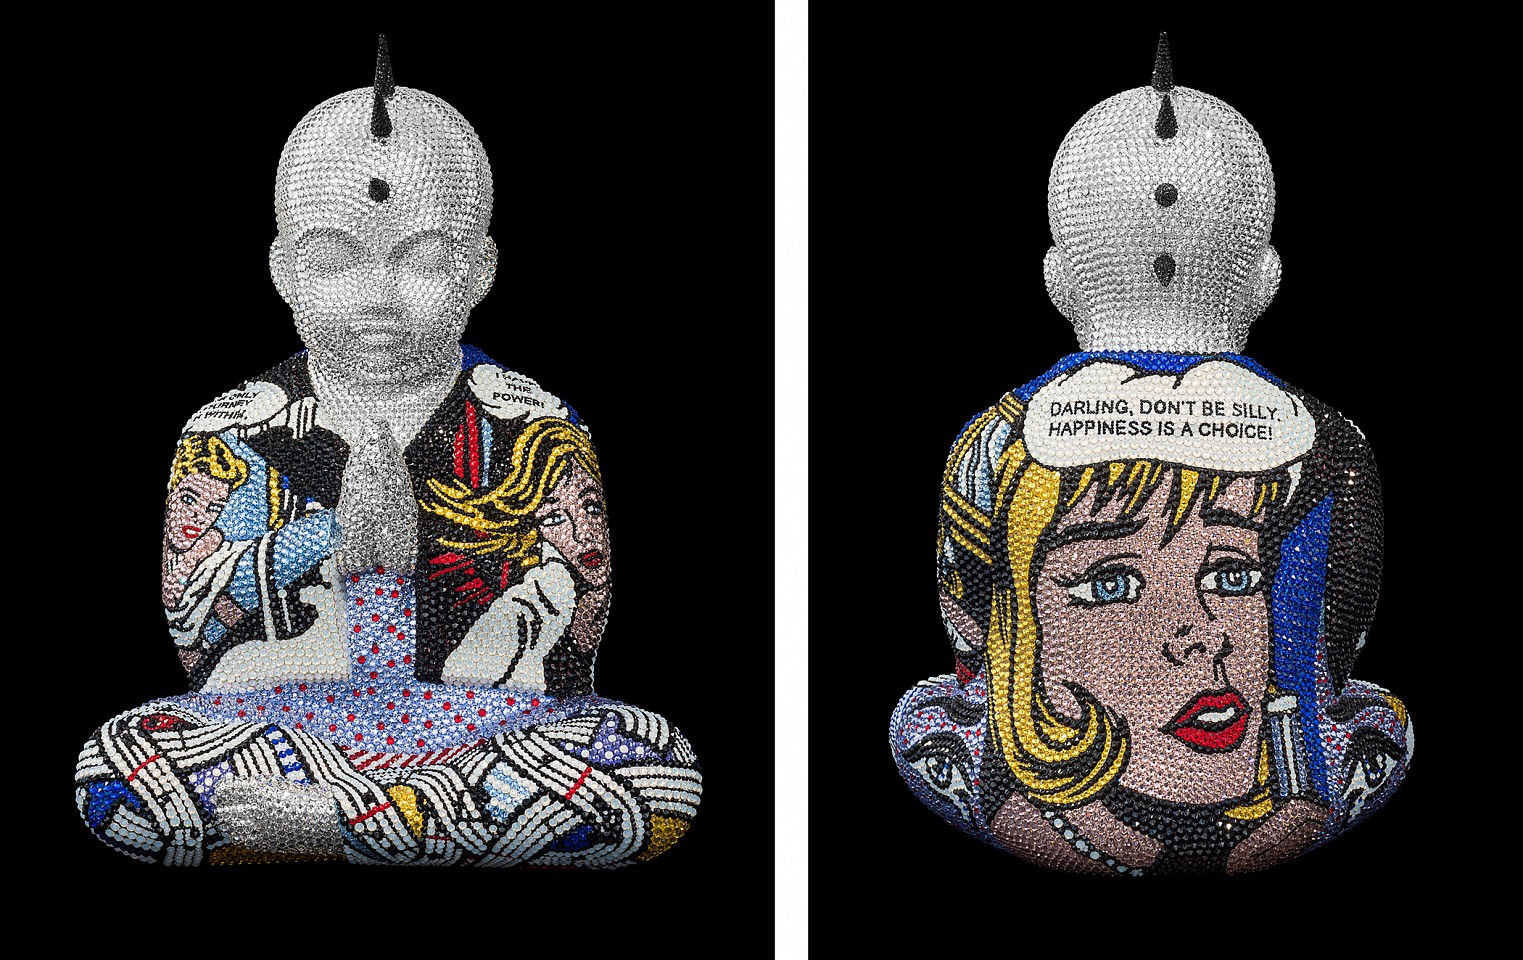 Metis Atash, PUNKBUDDHA large "AS LONG AS I HAVE A SONG" feat. Lichtenstein, 2021
Resin, acrylic paint and 28,000 Swarovski crystals, 17 1/2 x 12 x 9 in.
ATAS00240